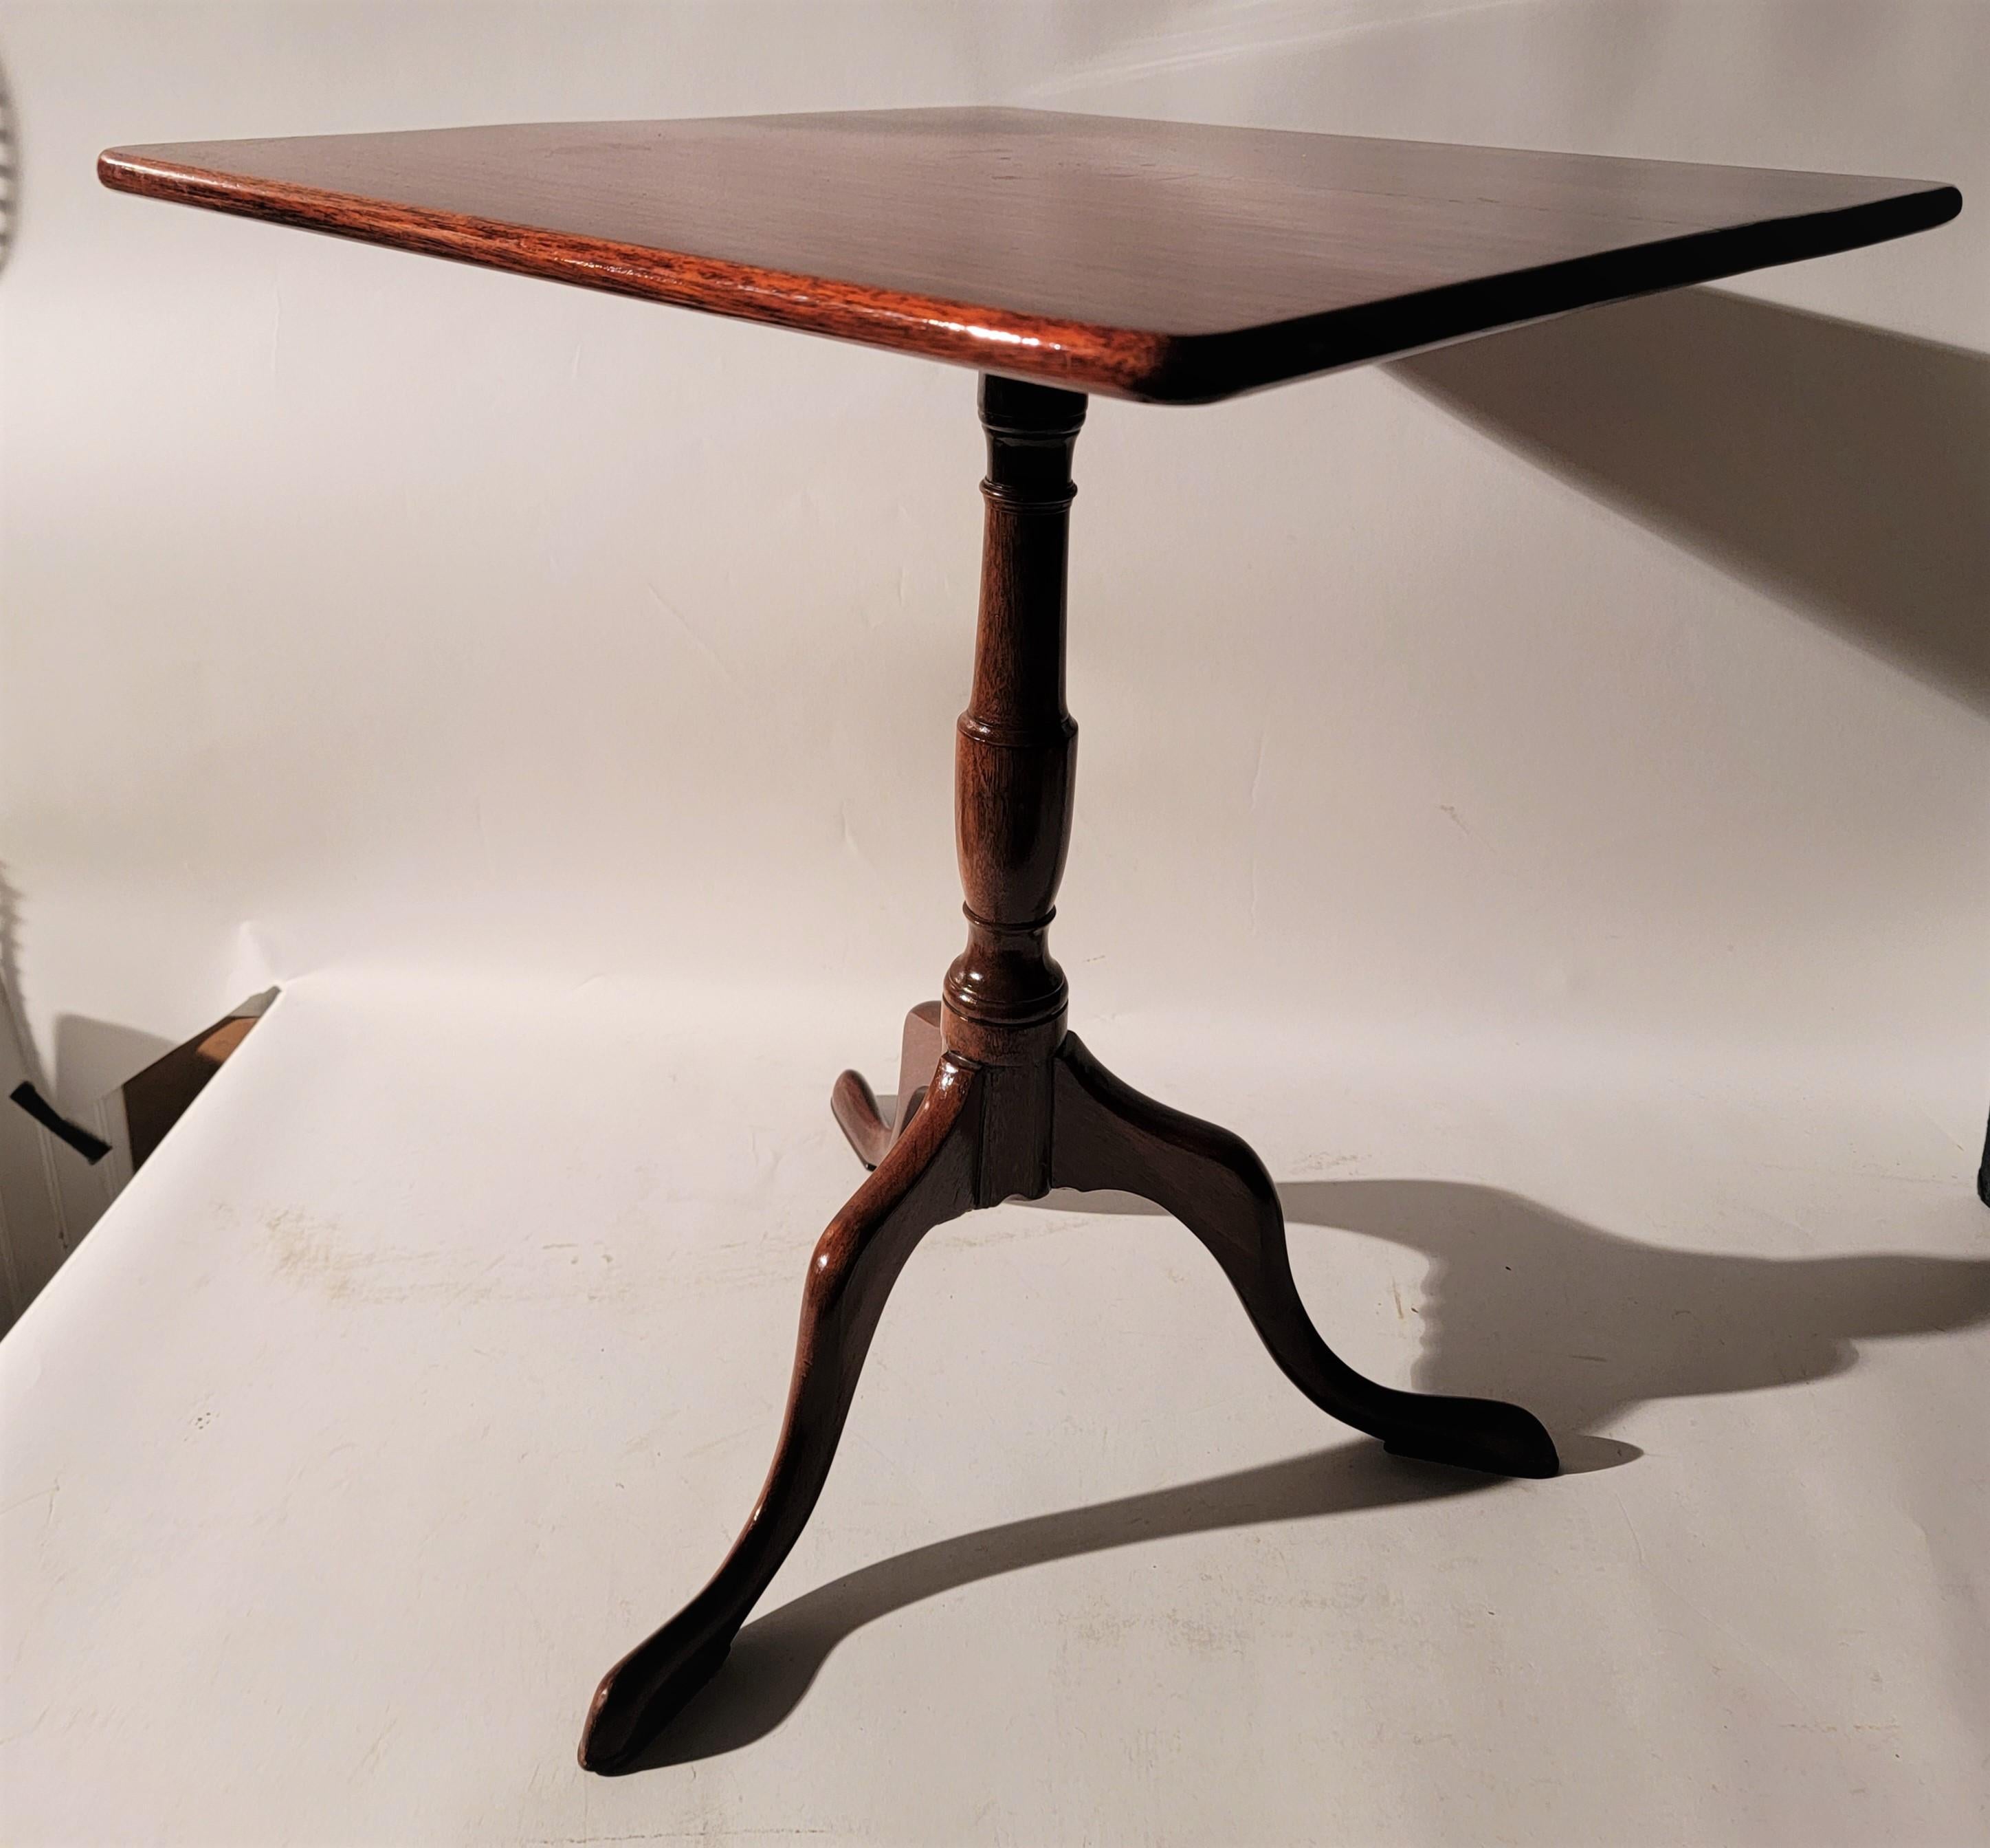 American Classical 19th C Tilt Top Mahogany Table For Sale